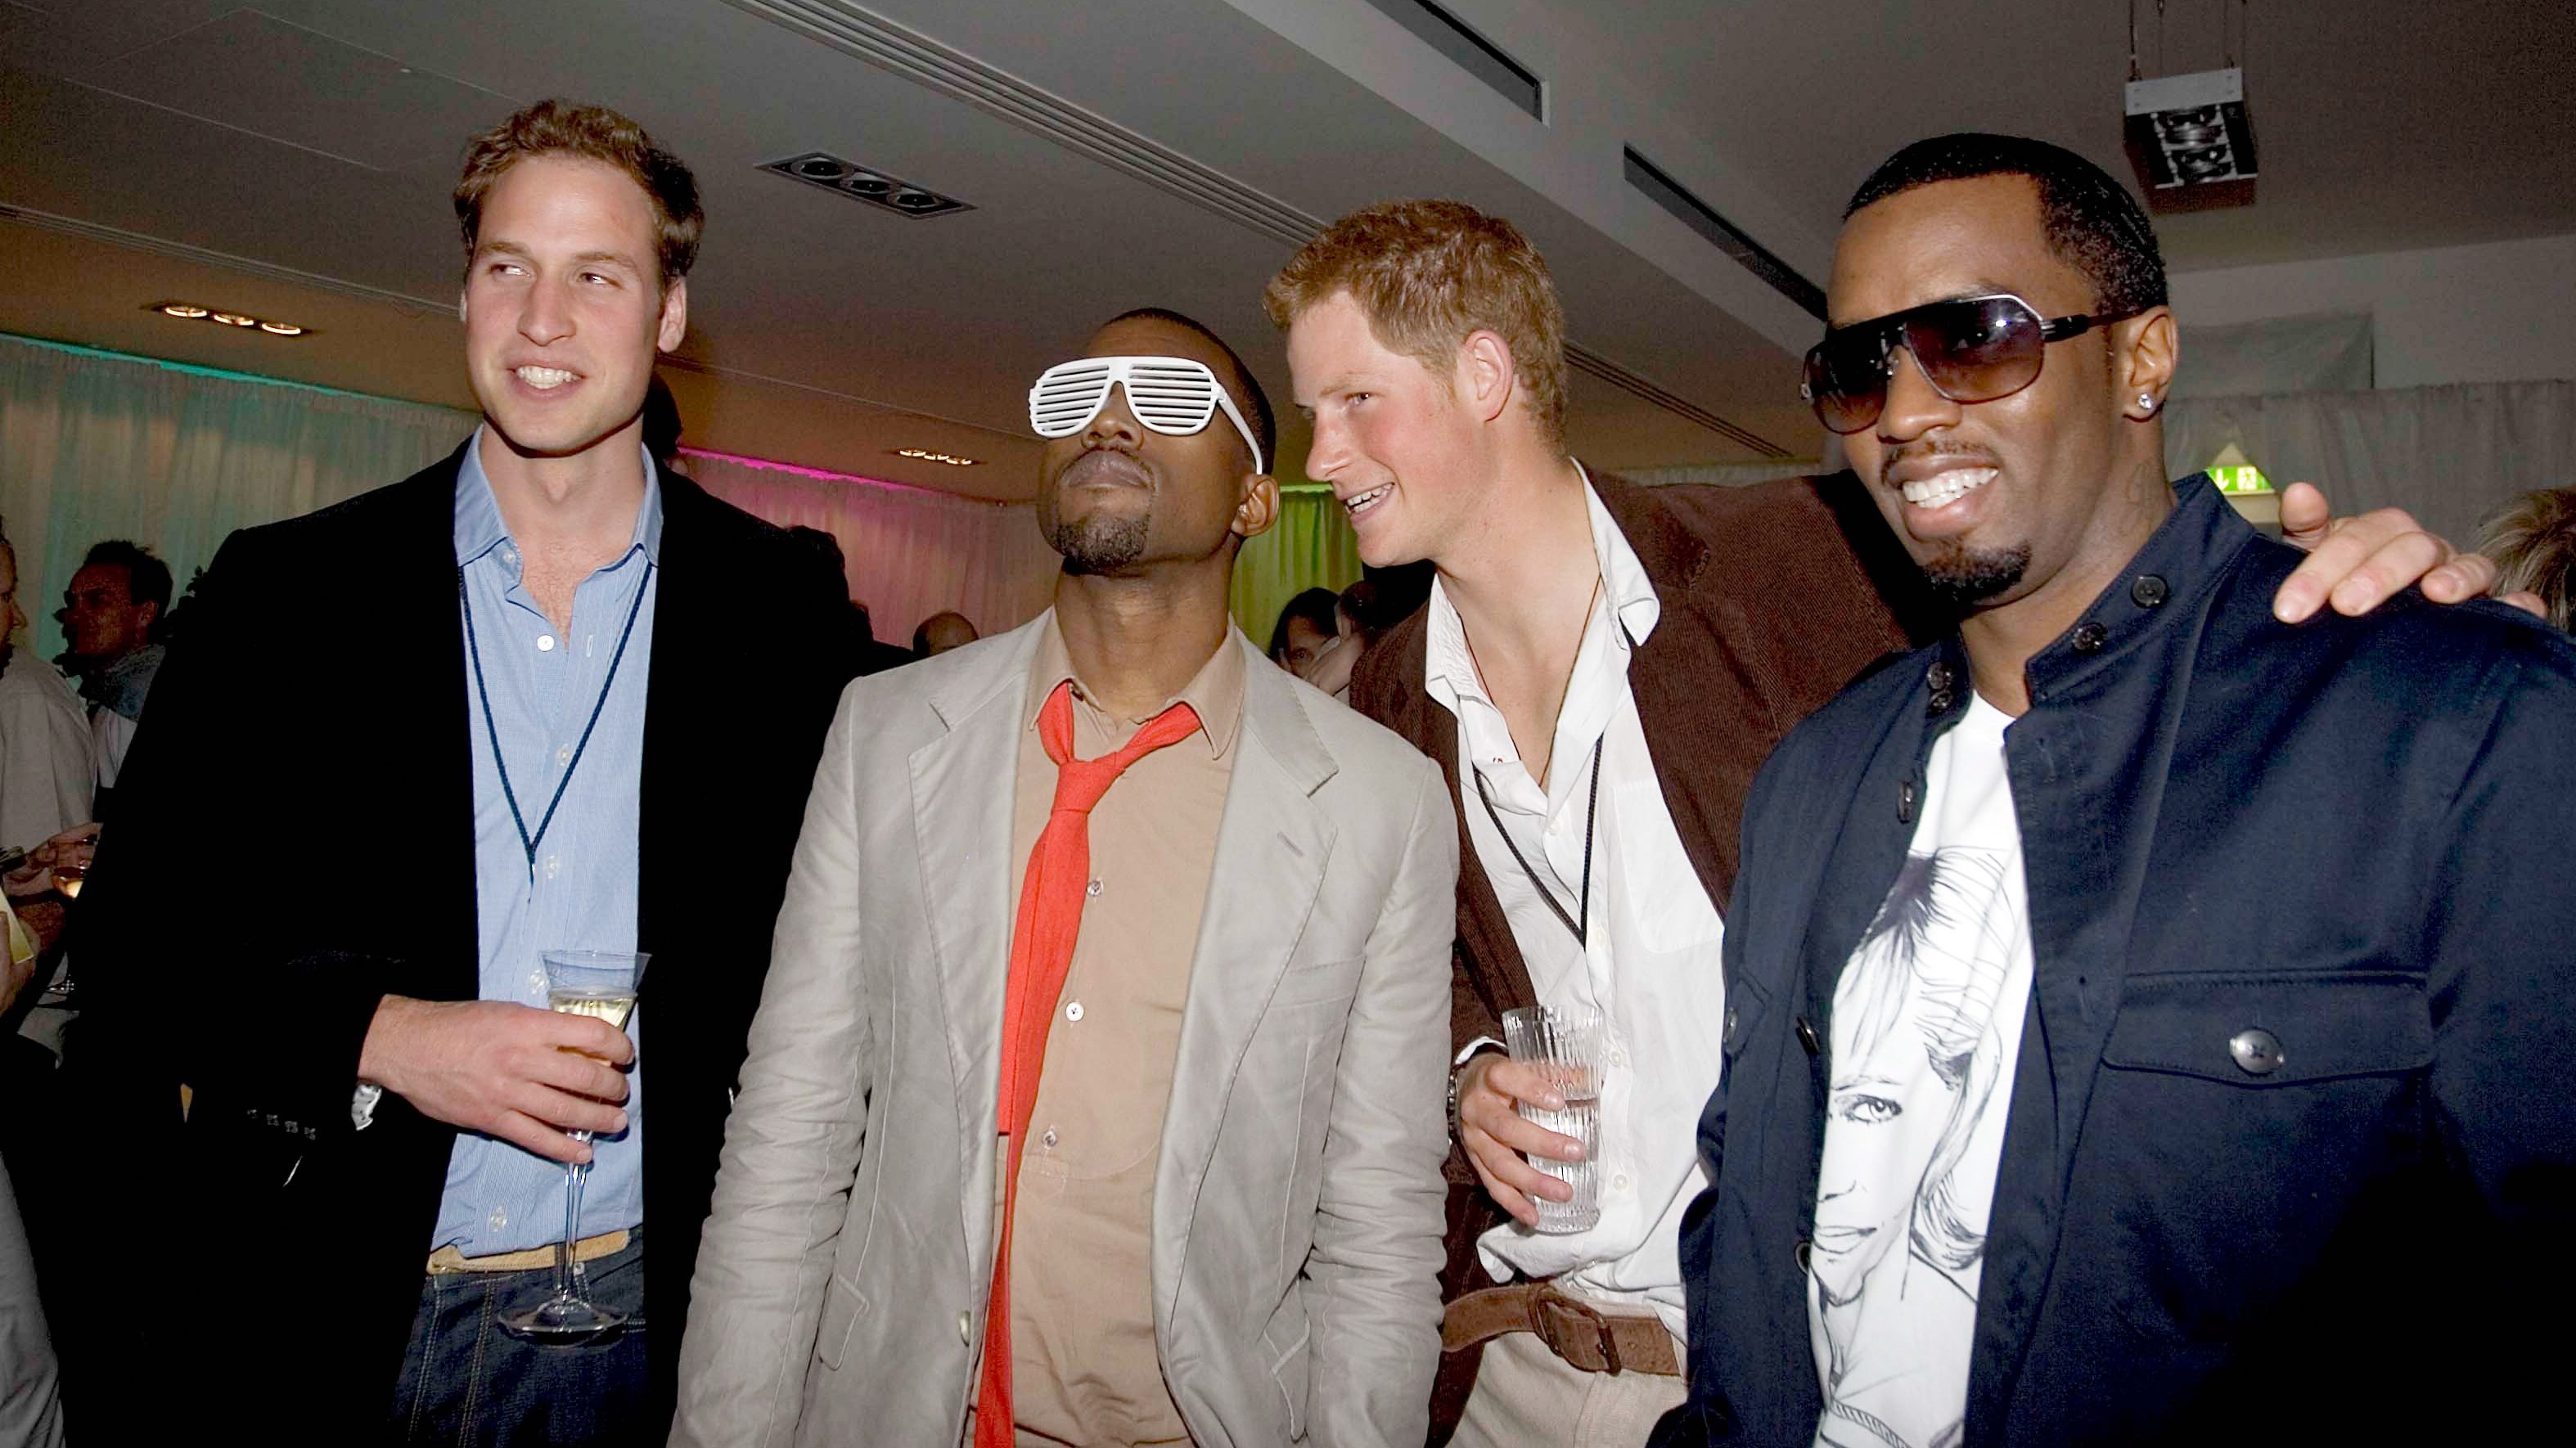 Princes William and Harry with Sean “Diddy” Combs, right, and Kanye West in London in 2007